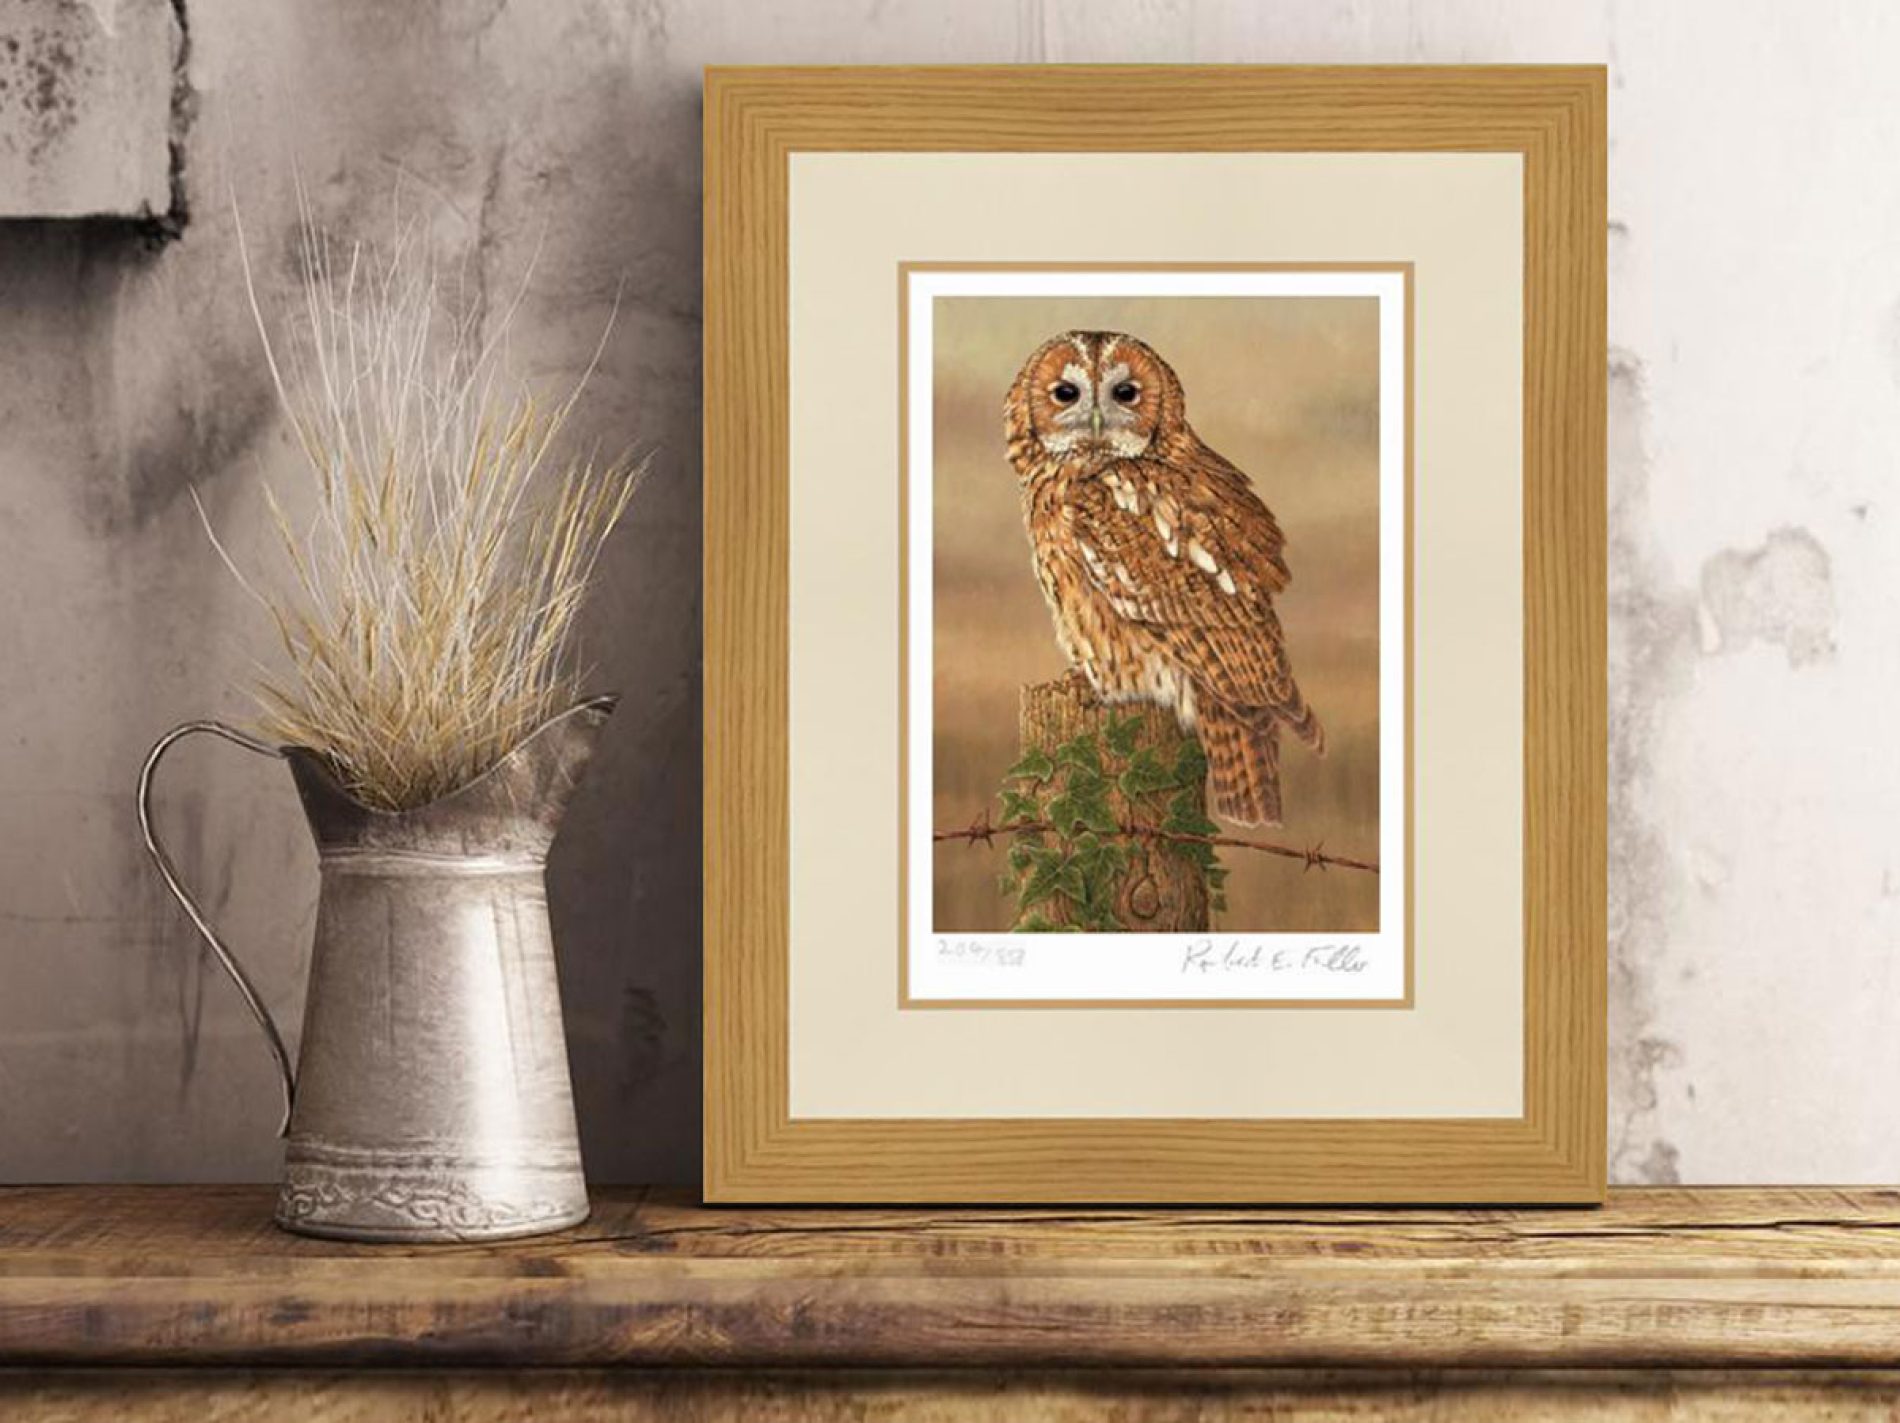 1200x900-Watchful-Tawny_Owl-Jug-PositvtPlus_Poster-Frame-Style-159-FREE_211116_PREV01